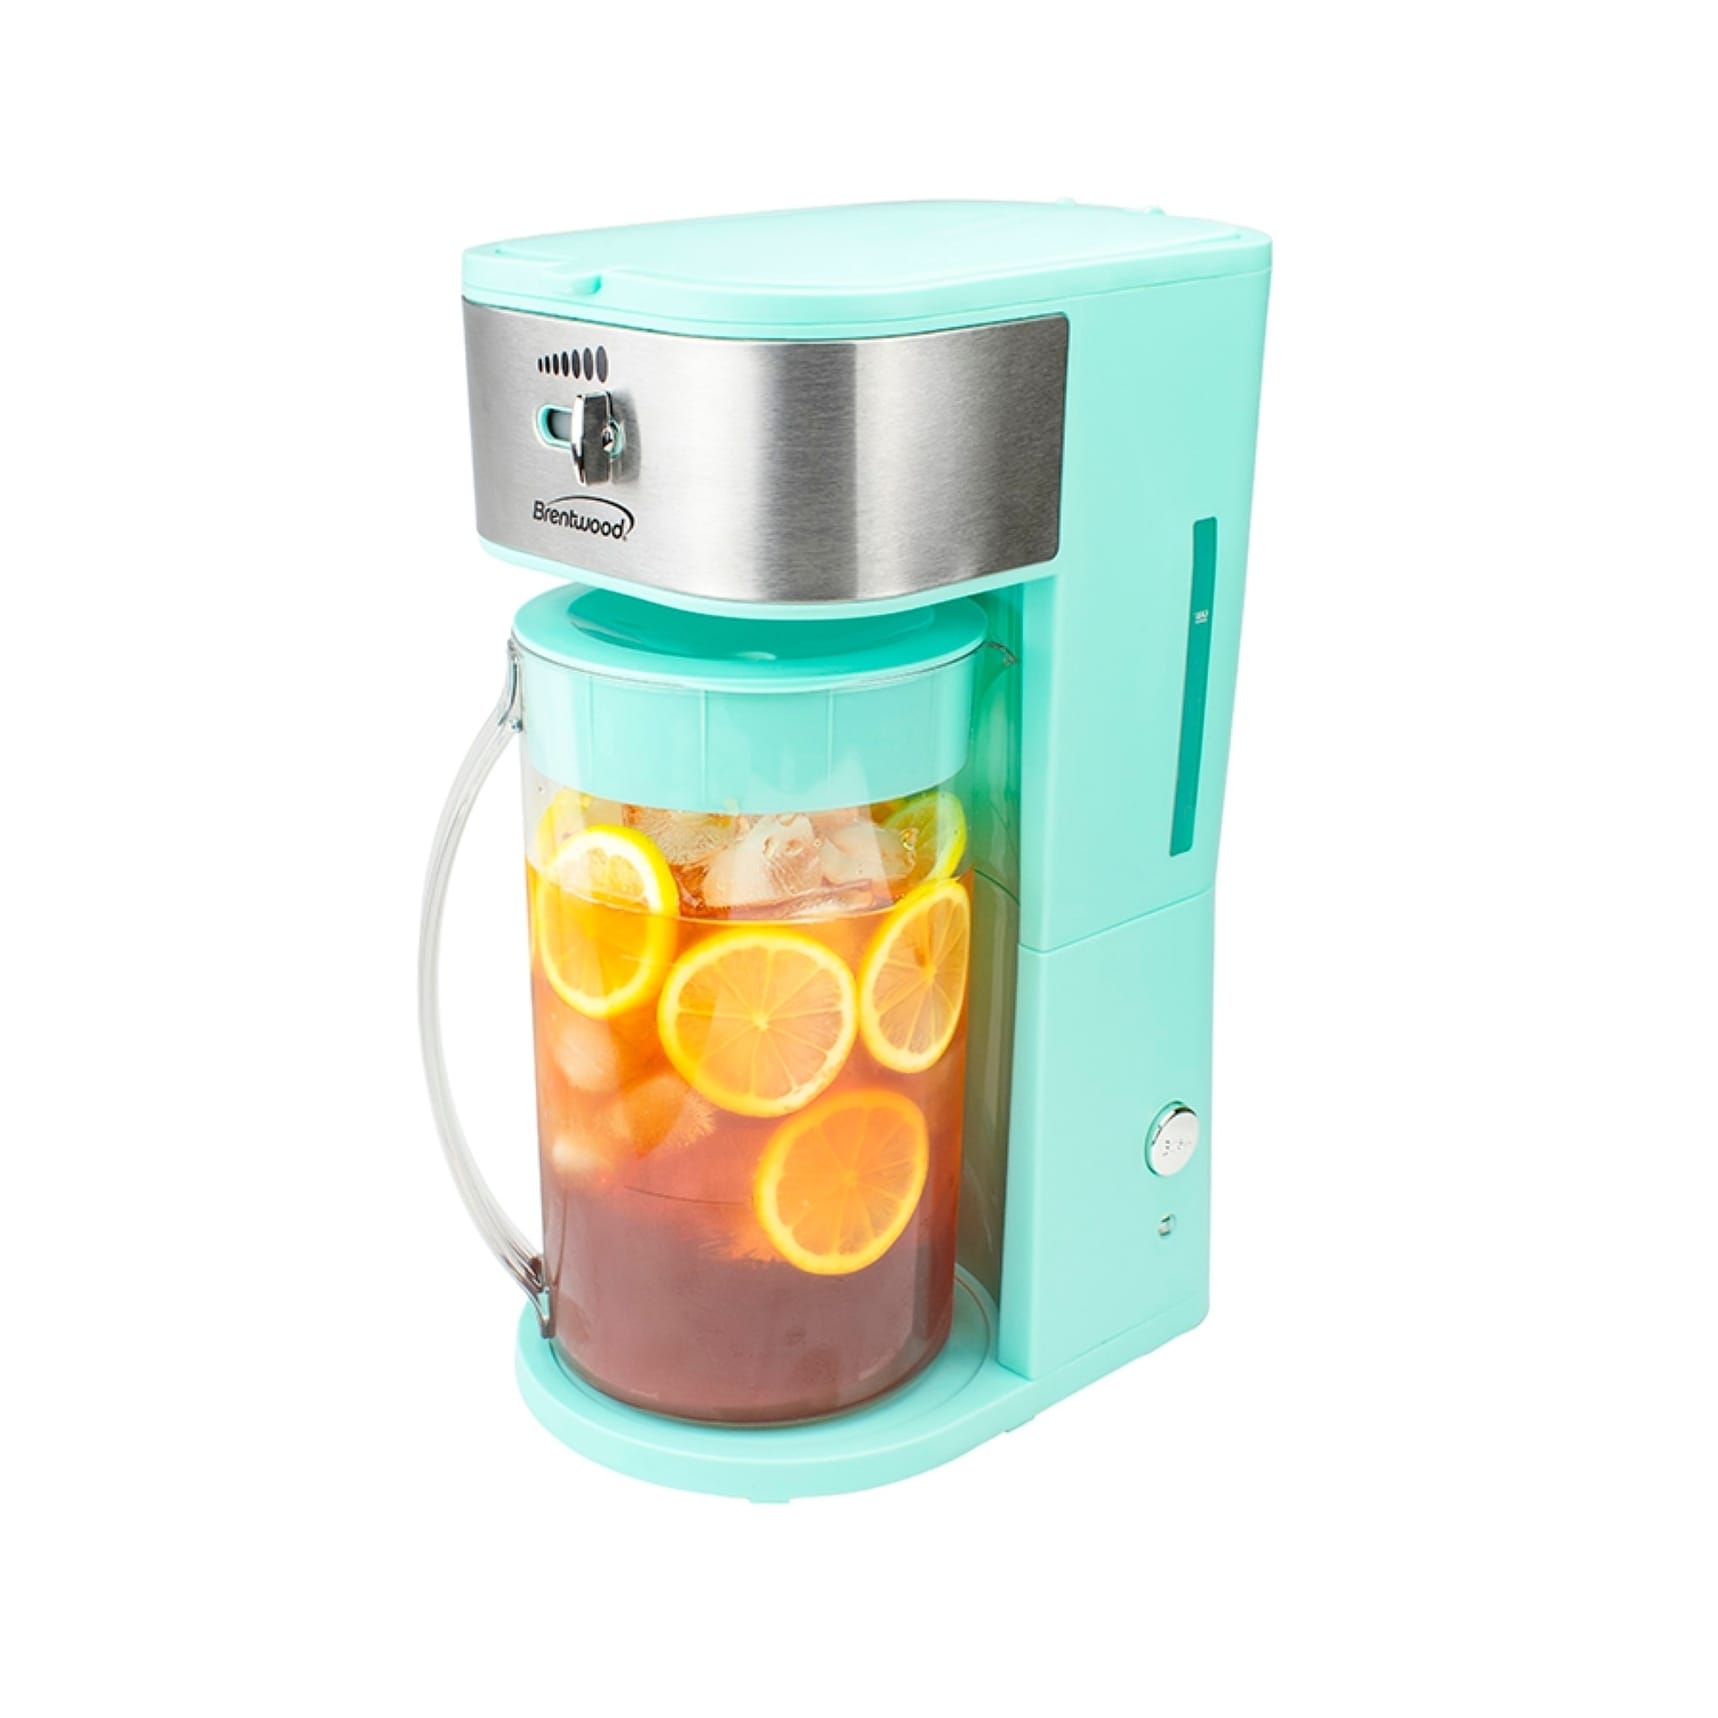 Brentwood KT-2150BK Iced Tea and Coffee Maker with 64oz Pitcher